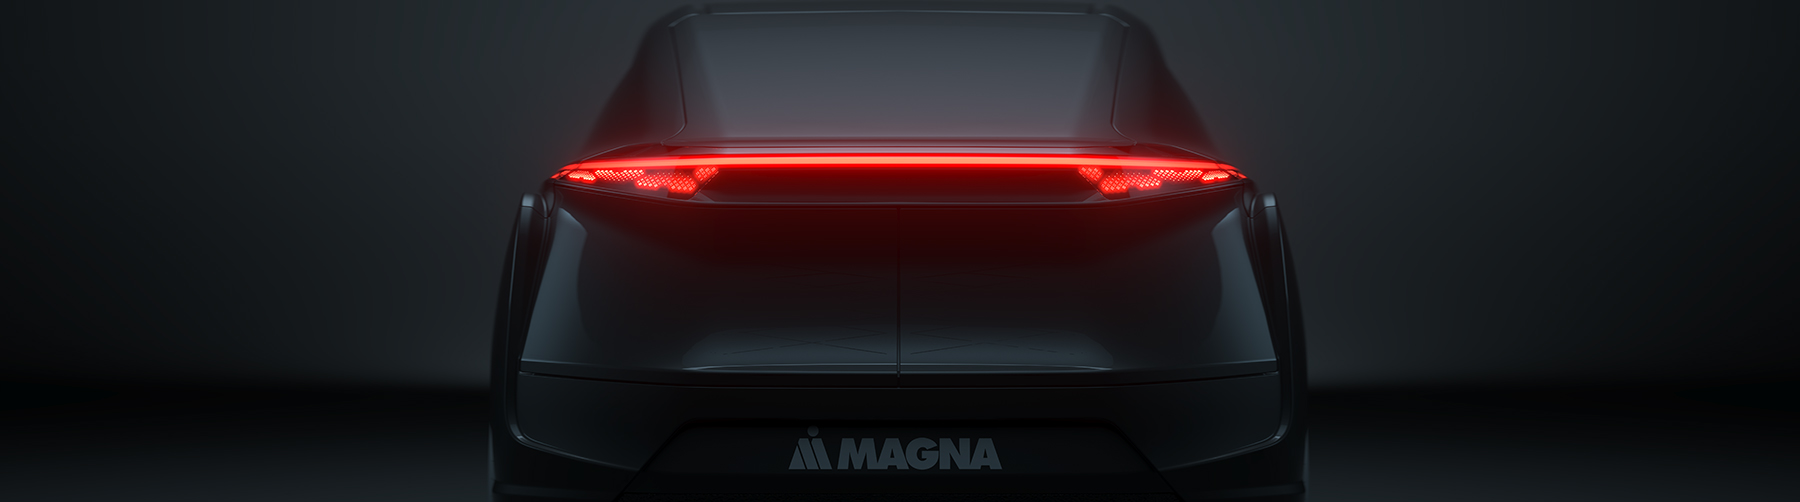 Picture of black vehicle tail lights